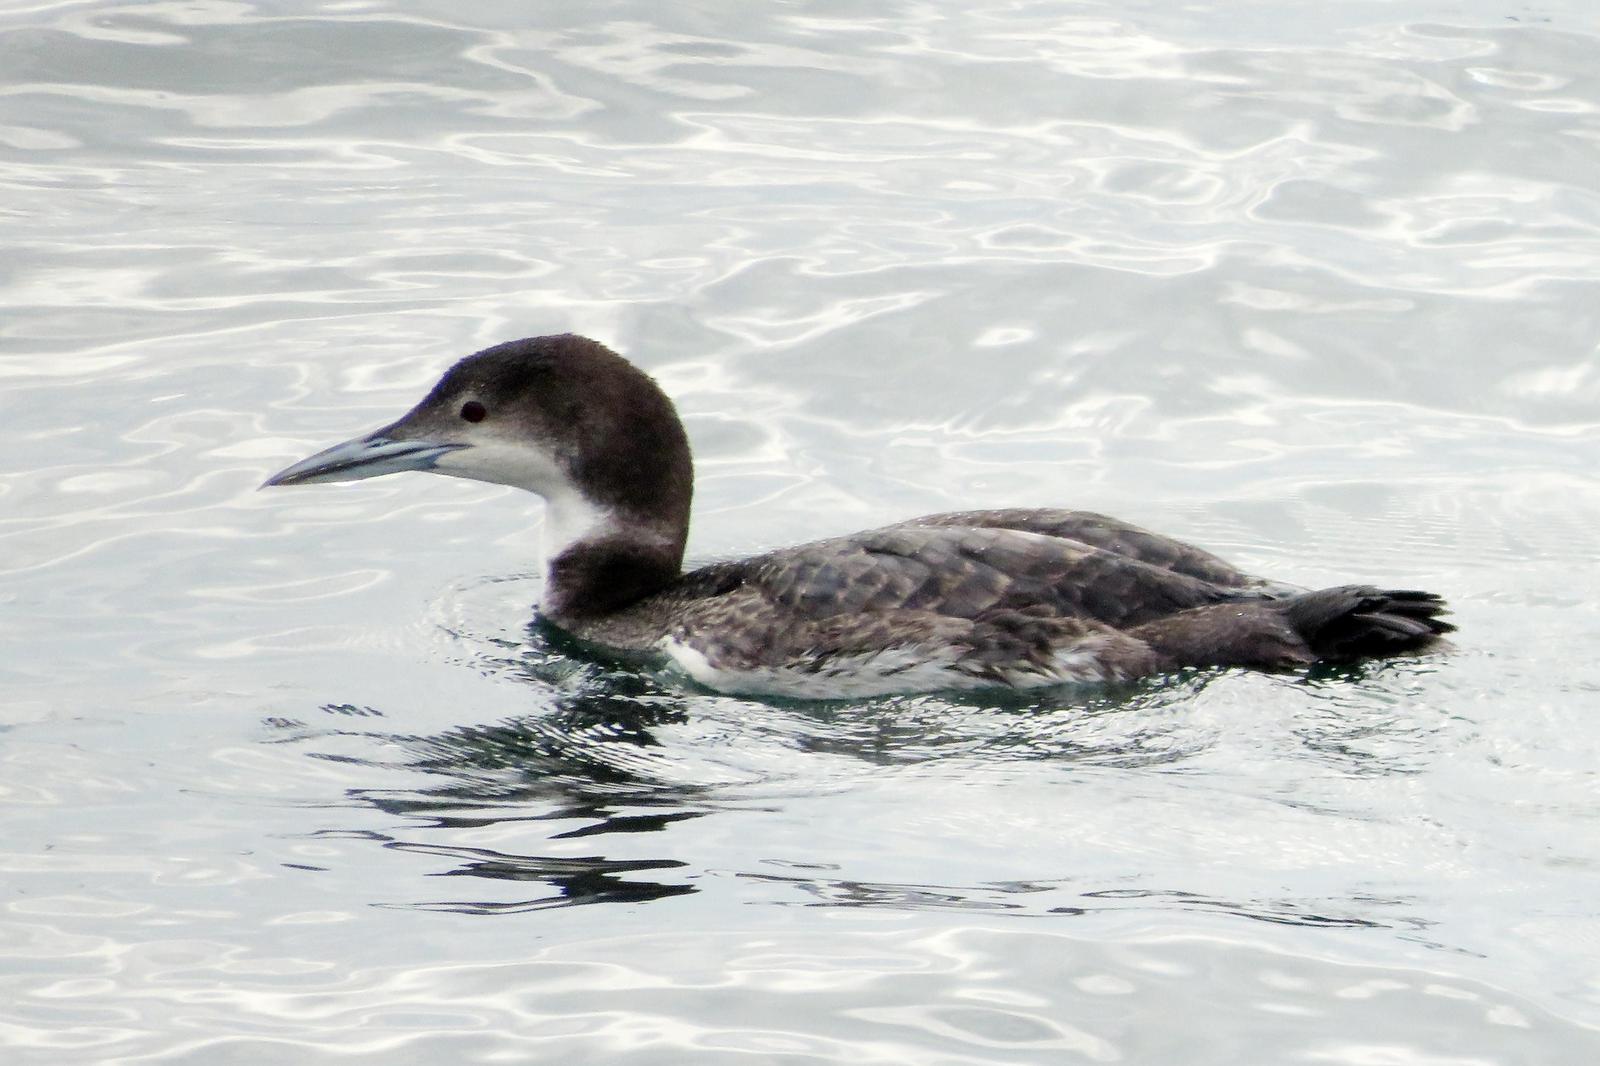 Common Loon Photo by Bob Neugebauer